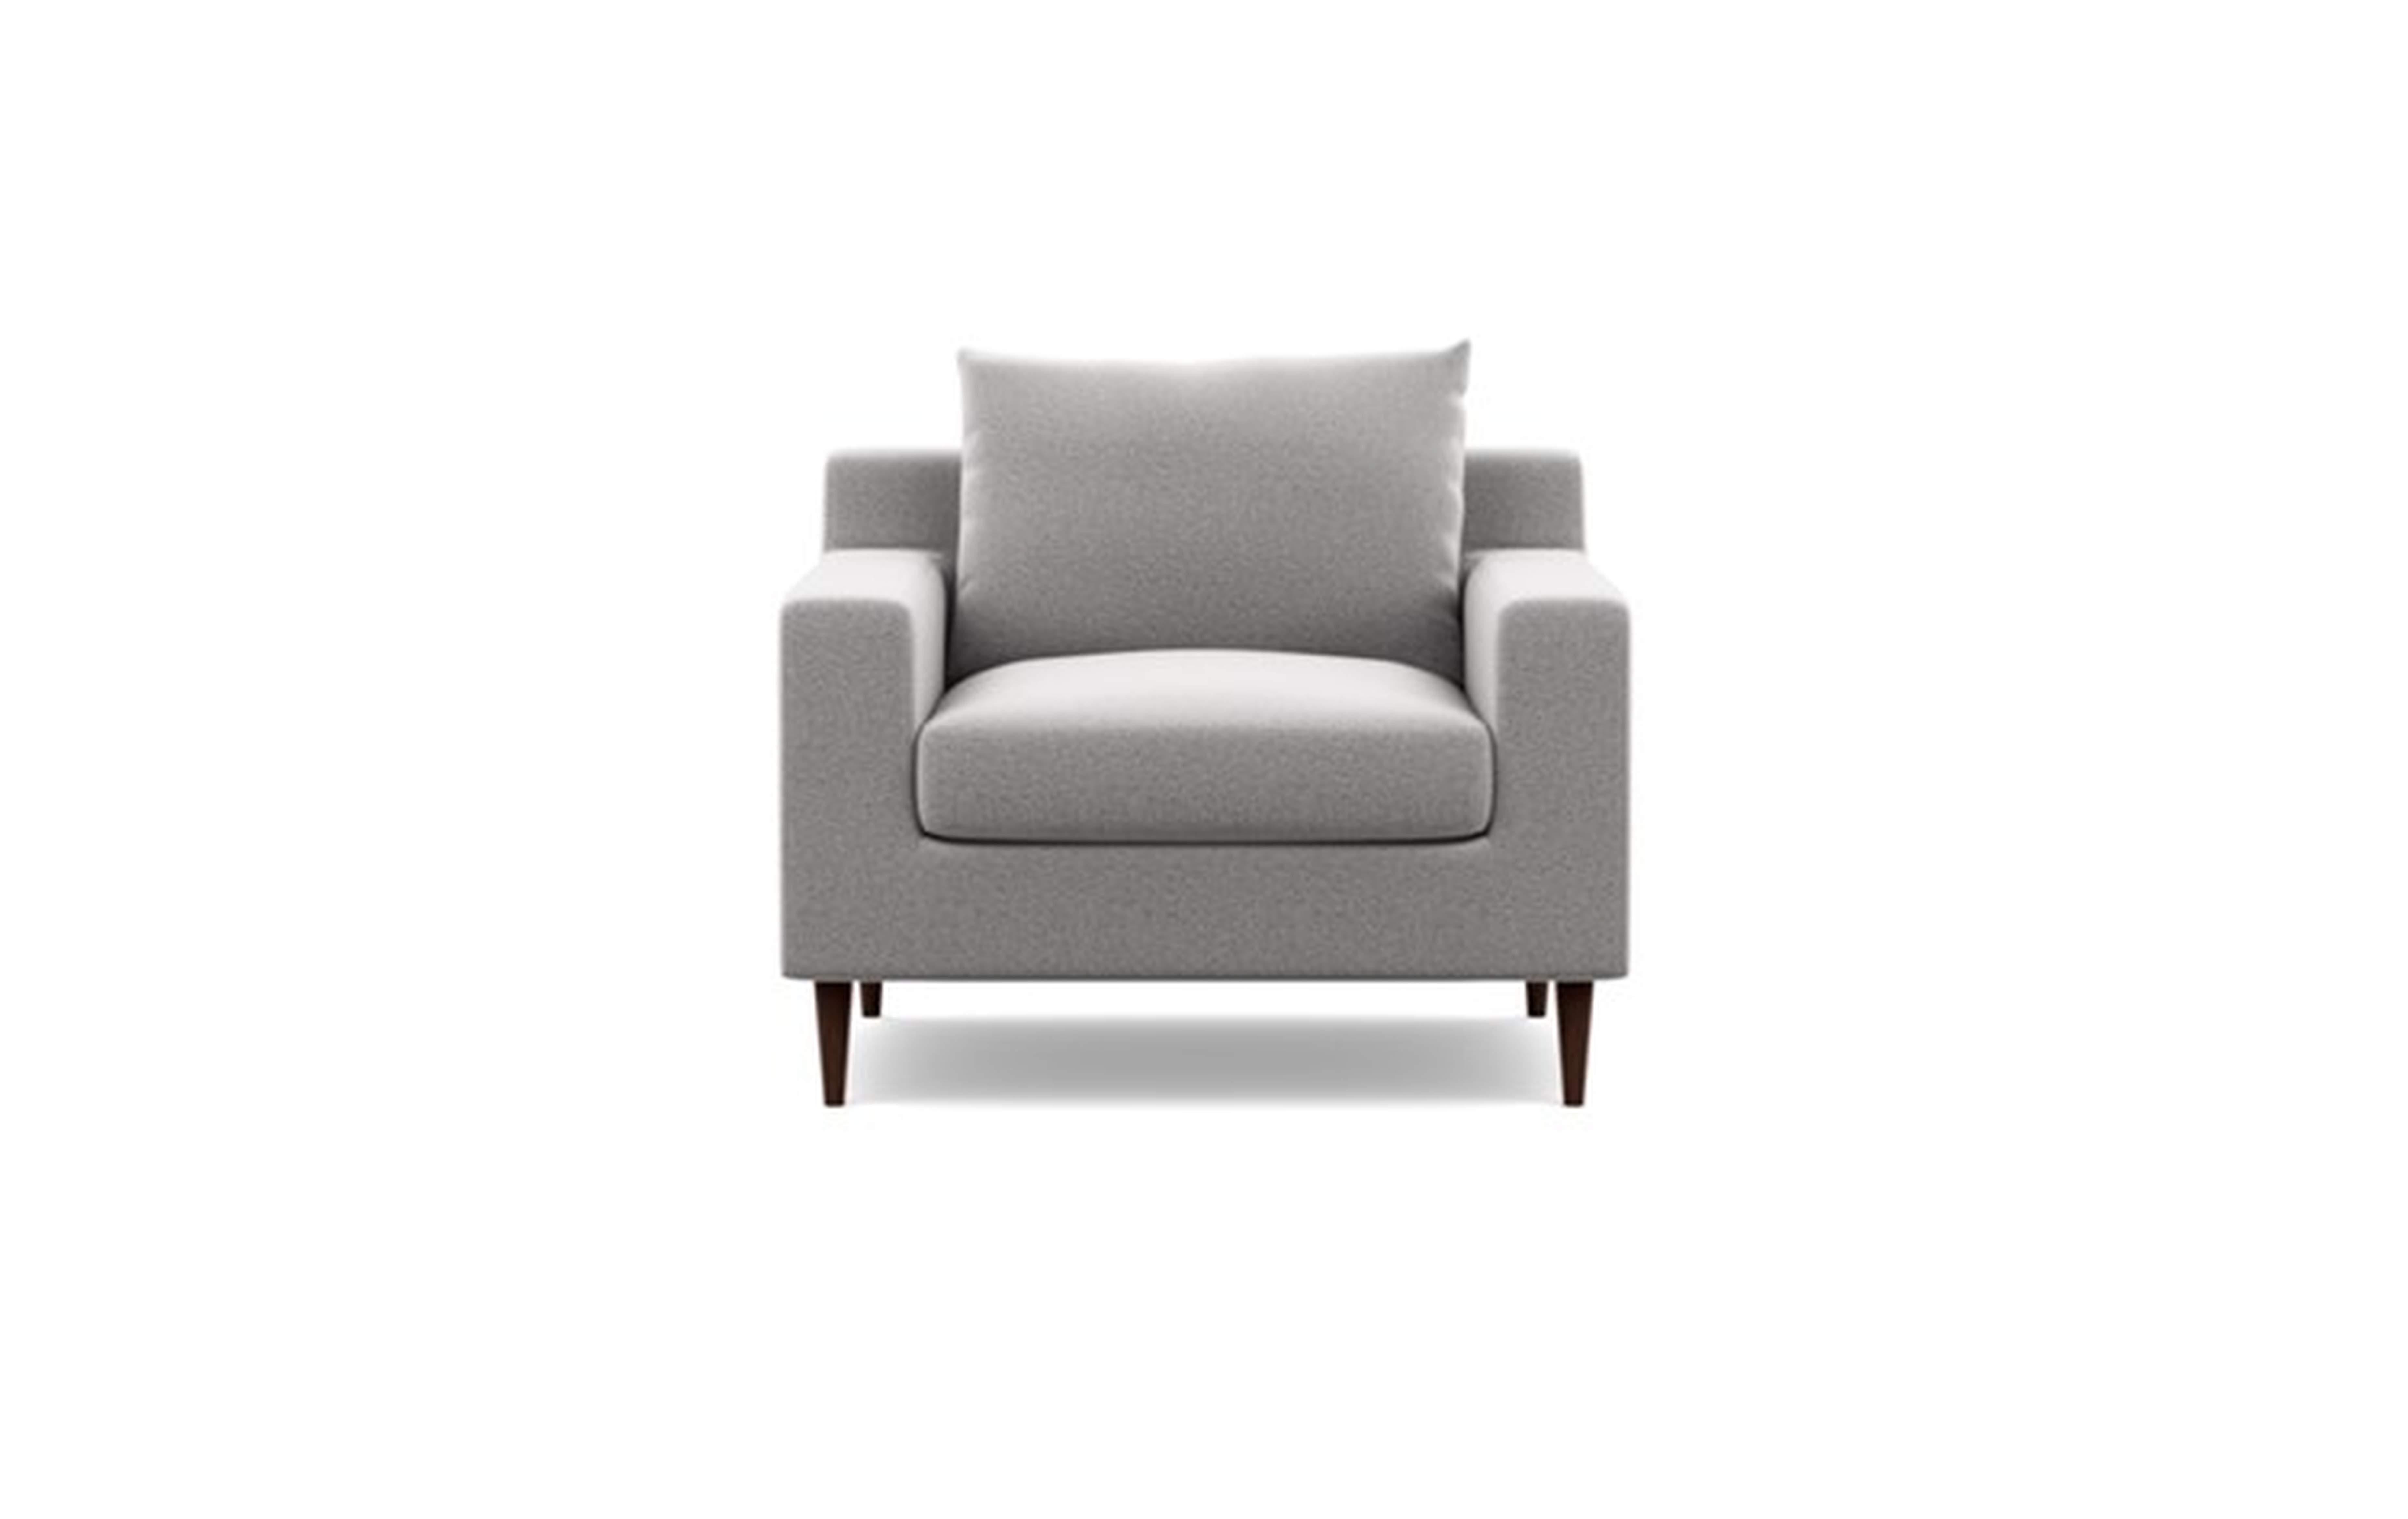 Sloan Accent Chair with Grey Ash Fabric and Oiled Walnut legs - Interior Define